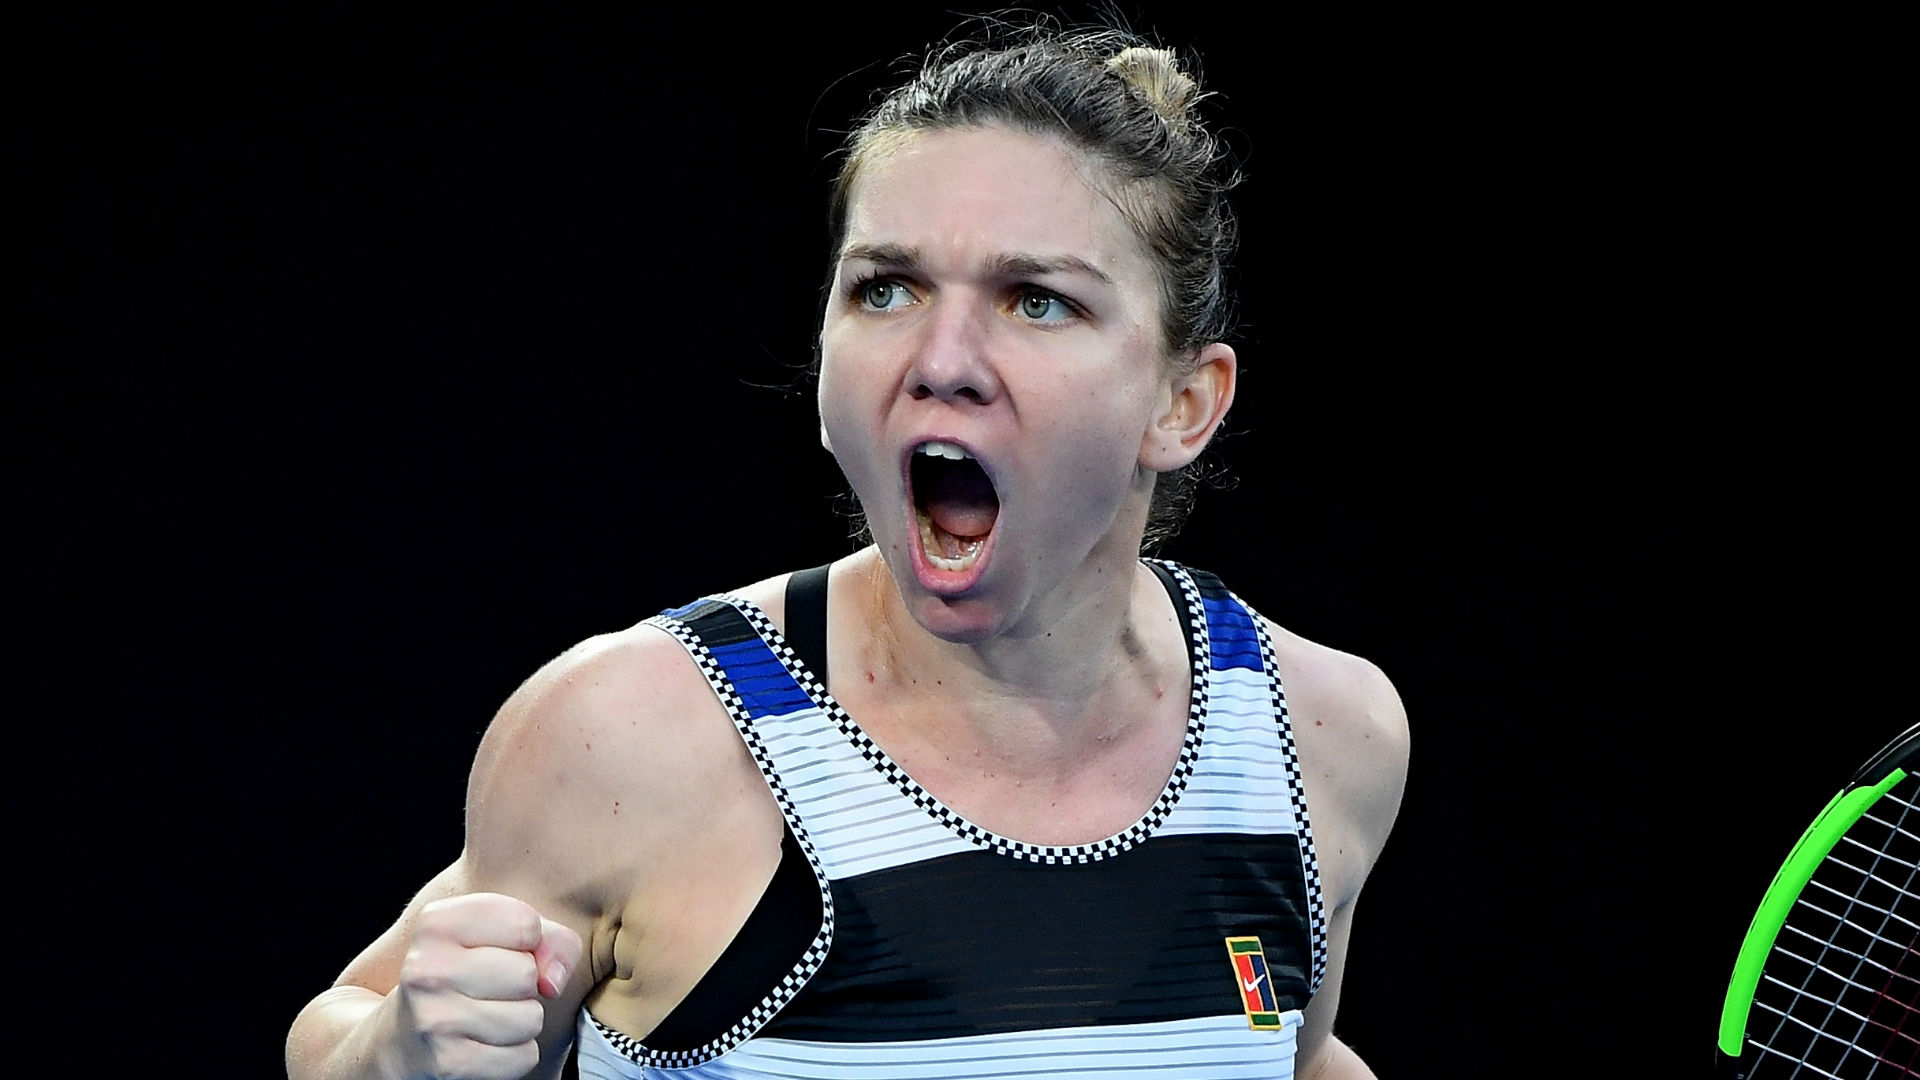 Simona Halep won five games in a row in the deciding set of a thrilling contest with Elina Svitolina to reach her first final of the season.